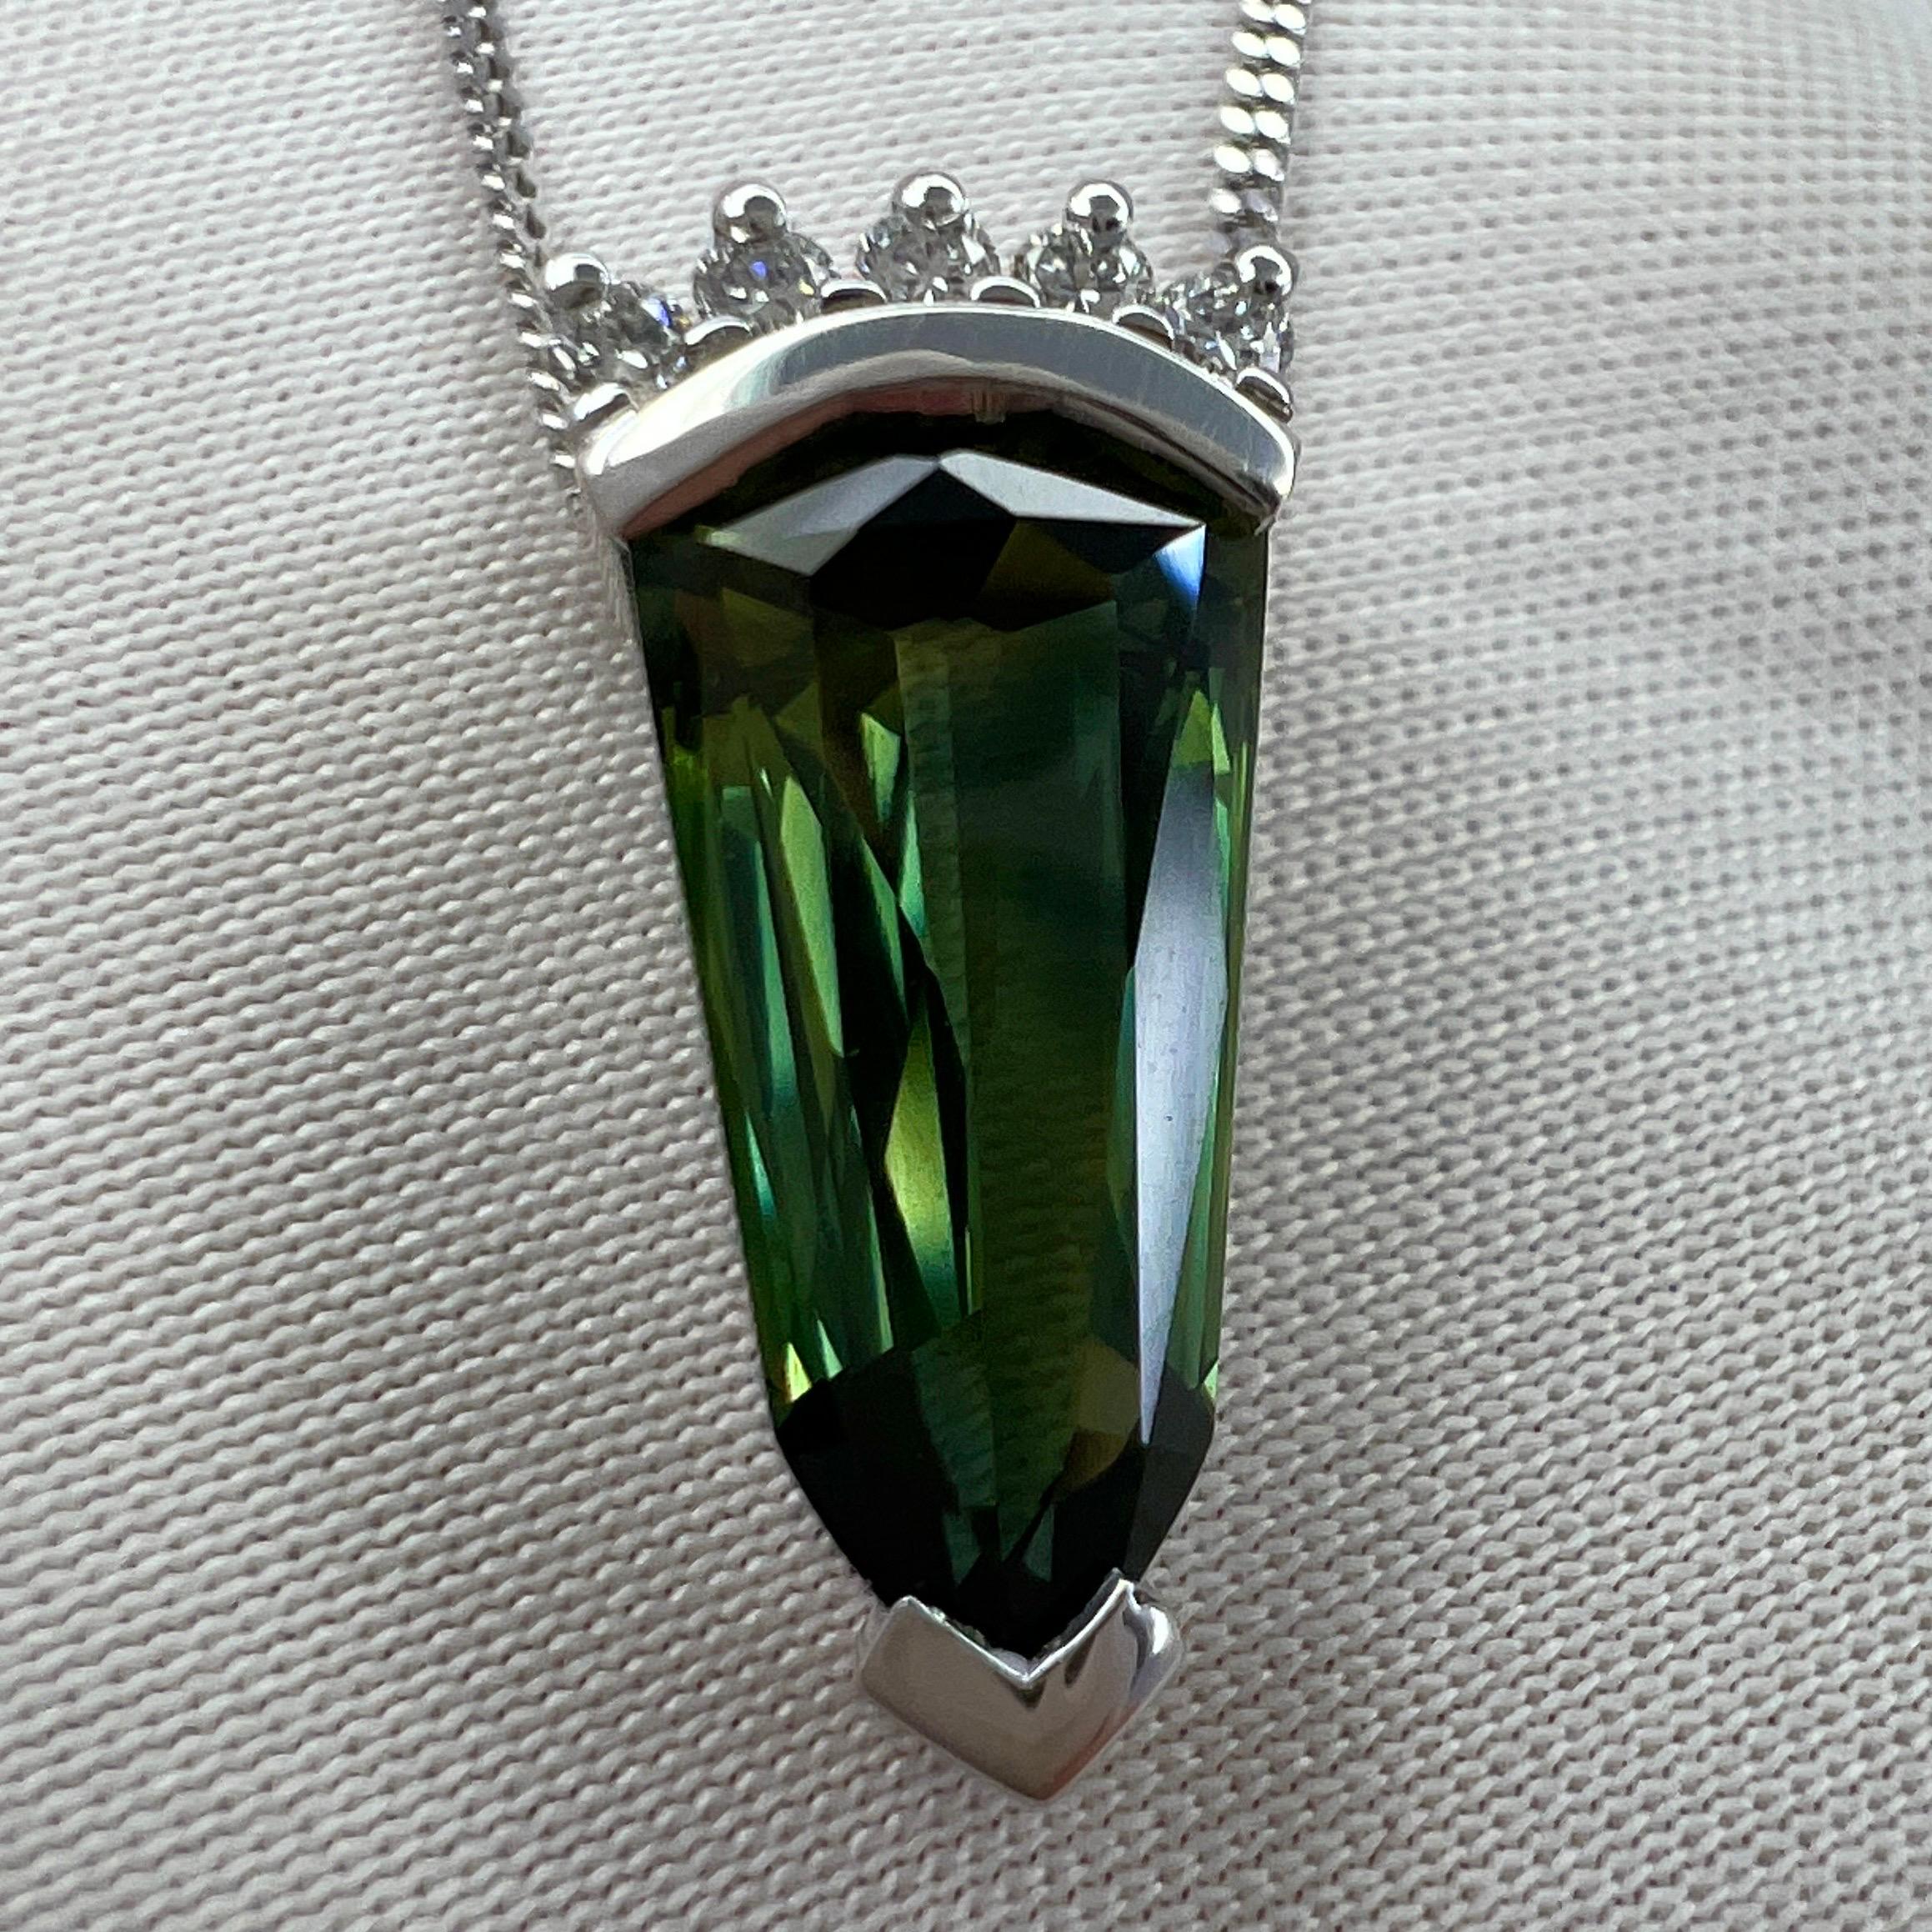 Fine Vivid Green Fancy Cut Australian Sapphire & Diamond 18k White Gold Pendant Necklace.

Unique 2.70 carat sapphire with a vivid green colour and excellent clarity, very clean stone.
The sapphire also has an excellent fancy cut which shows lots of